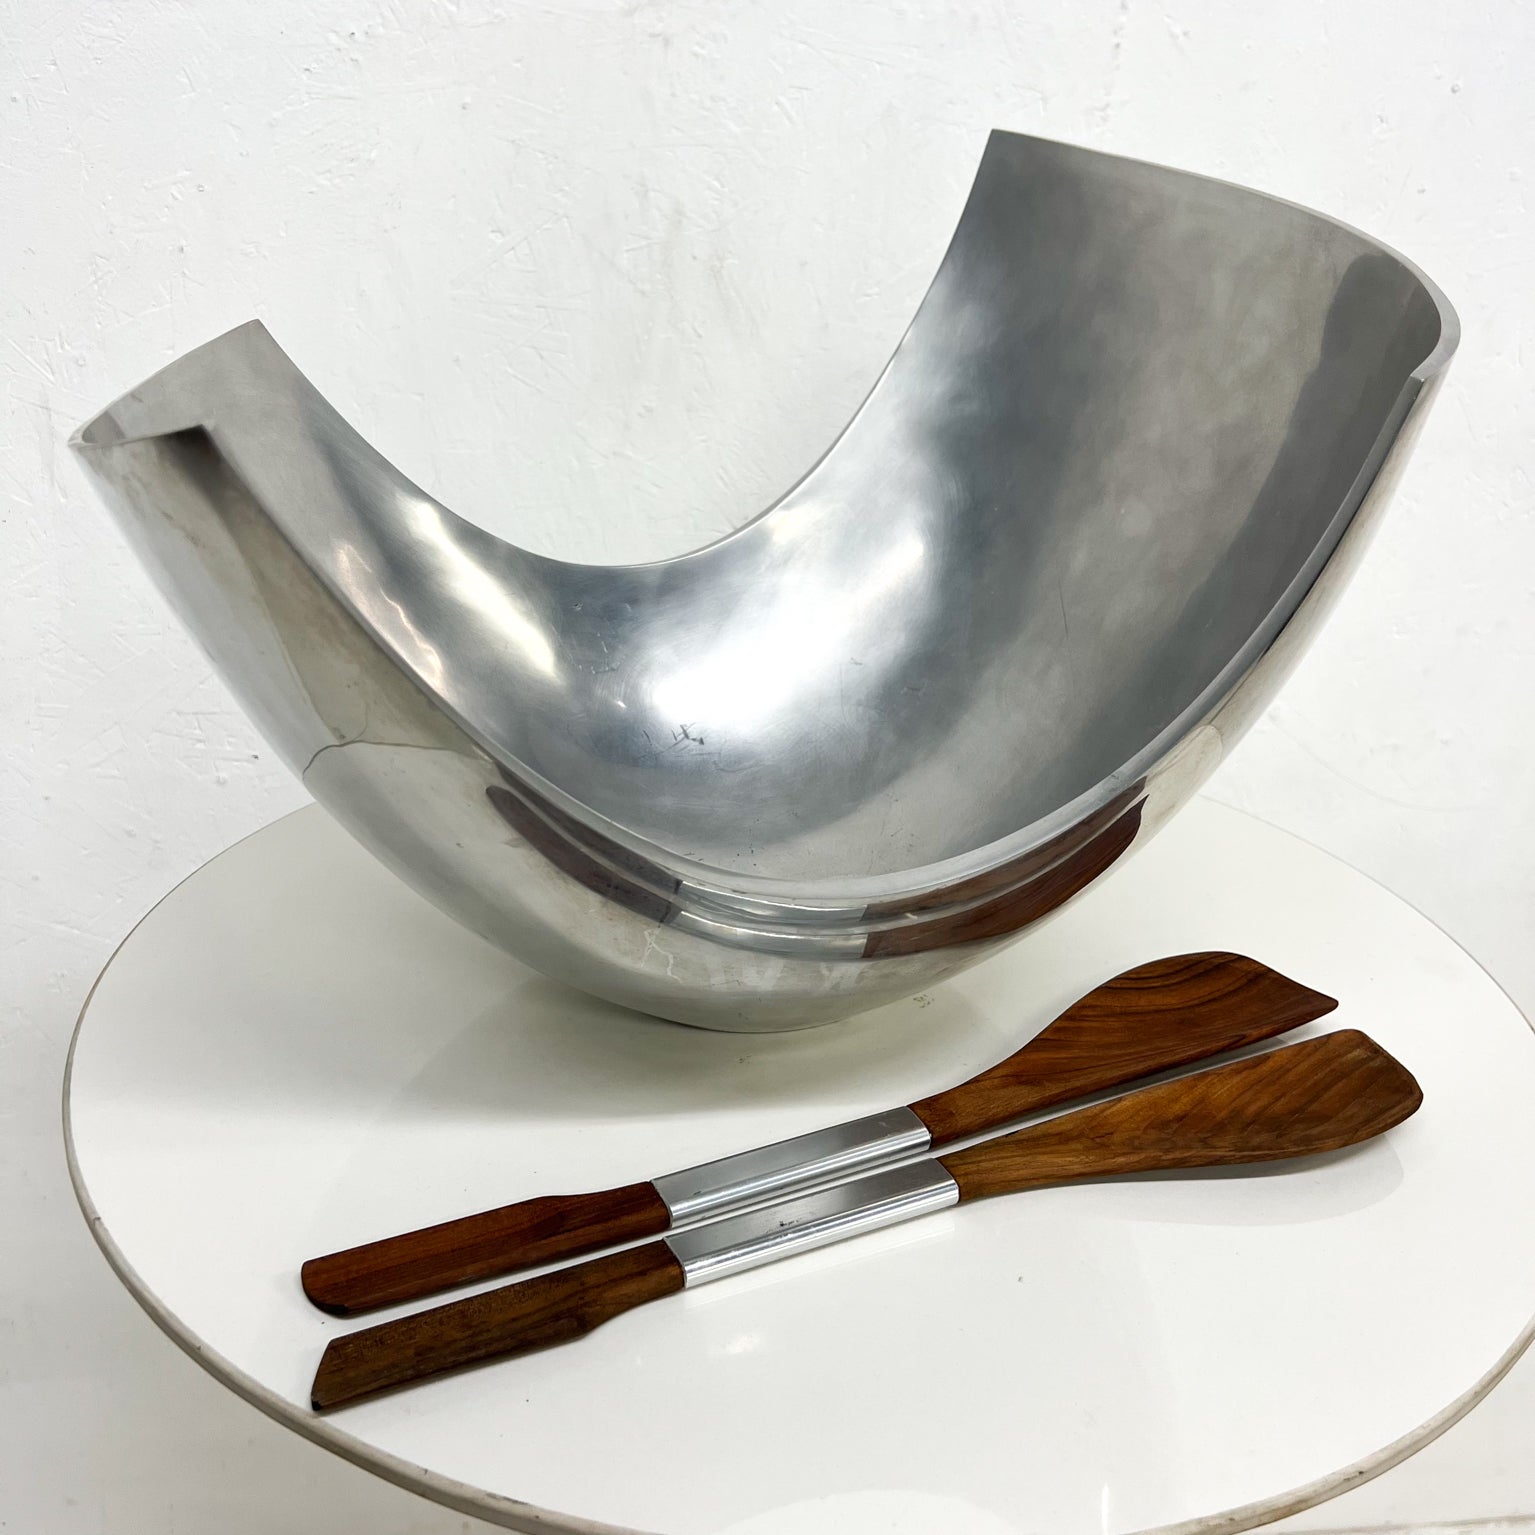 Stunning Polished Aluminum serving bowl by Michael Lax for METAAL
13 tall x 18.5 w x 13.5 d    Salad servers 16 long
Set includes sculptural salad servers in wood and aluminum (different maker).
Preowned unrestored vintage condition
See images